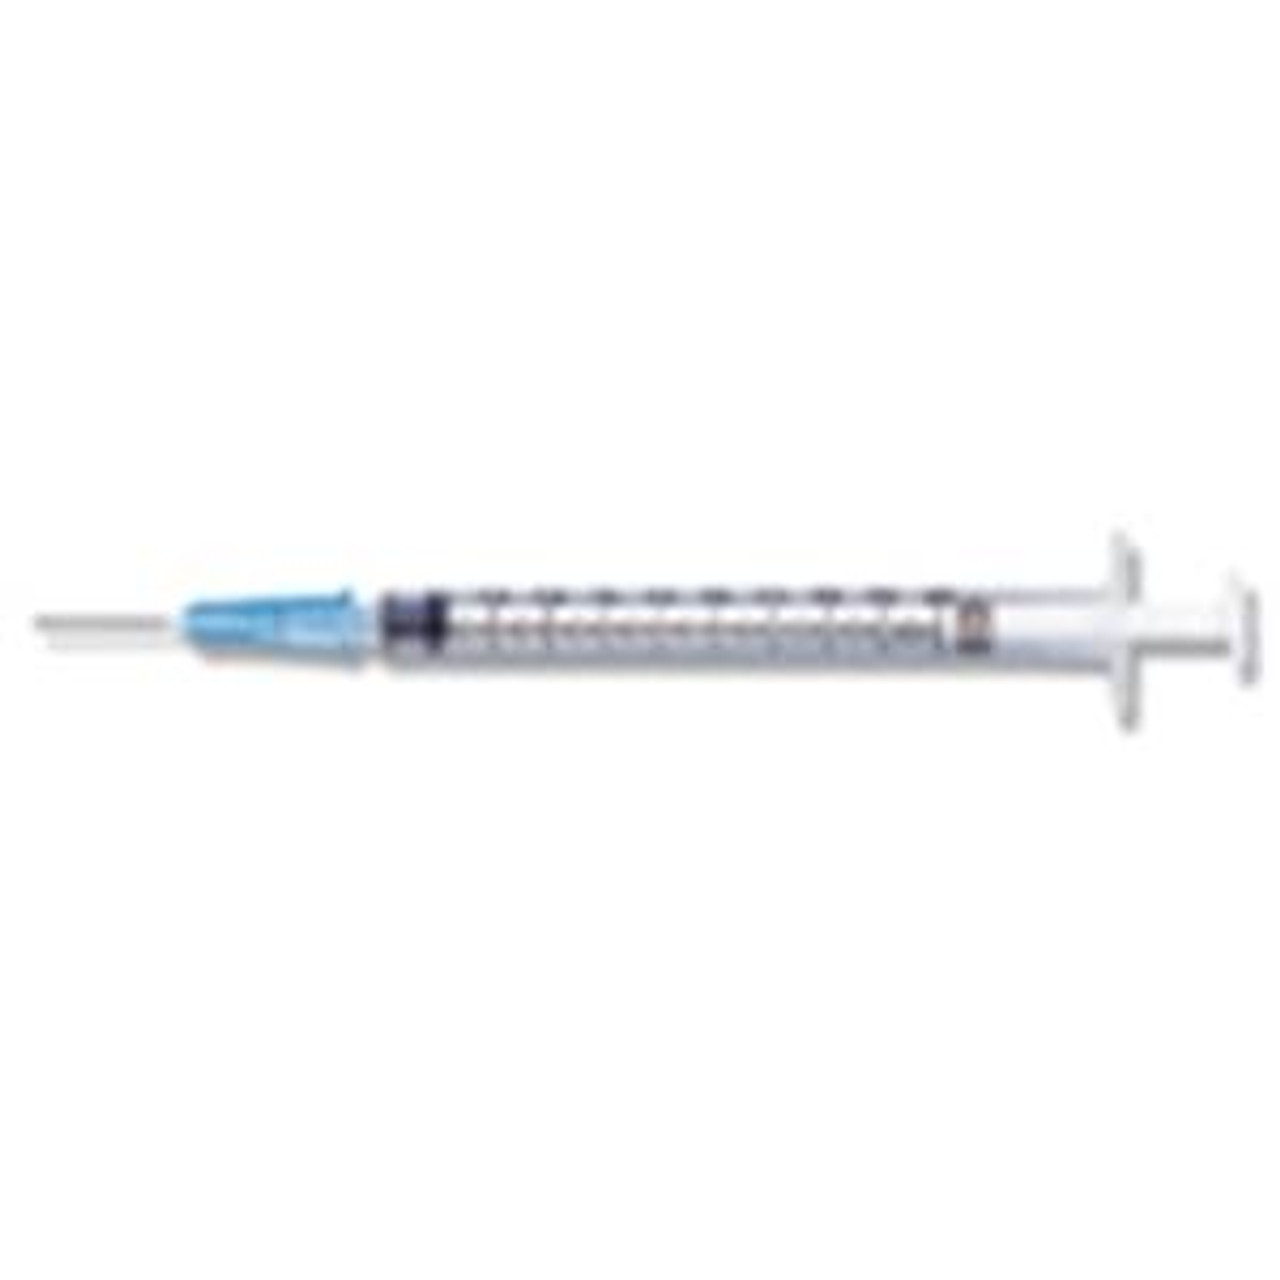 PrecisionGlide Syringe - 3cc - 25G x 1 inch (Box of 100) - Modern Medical  Products